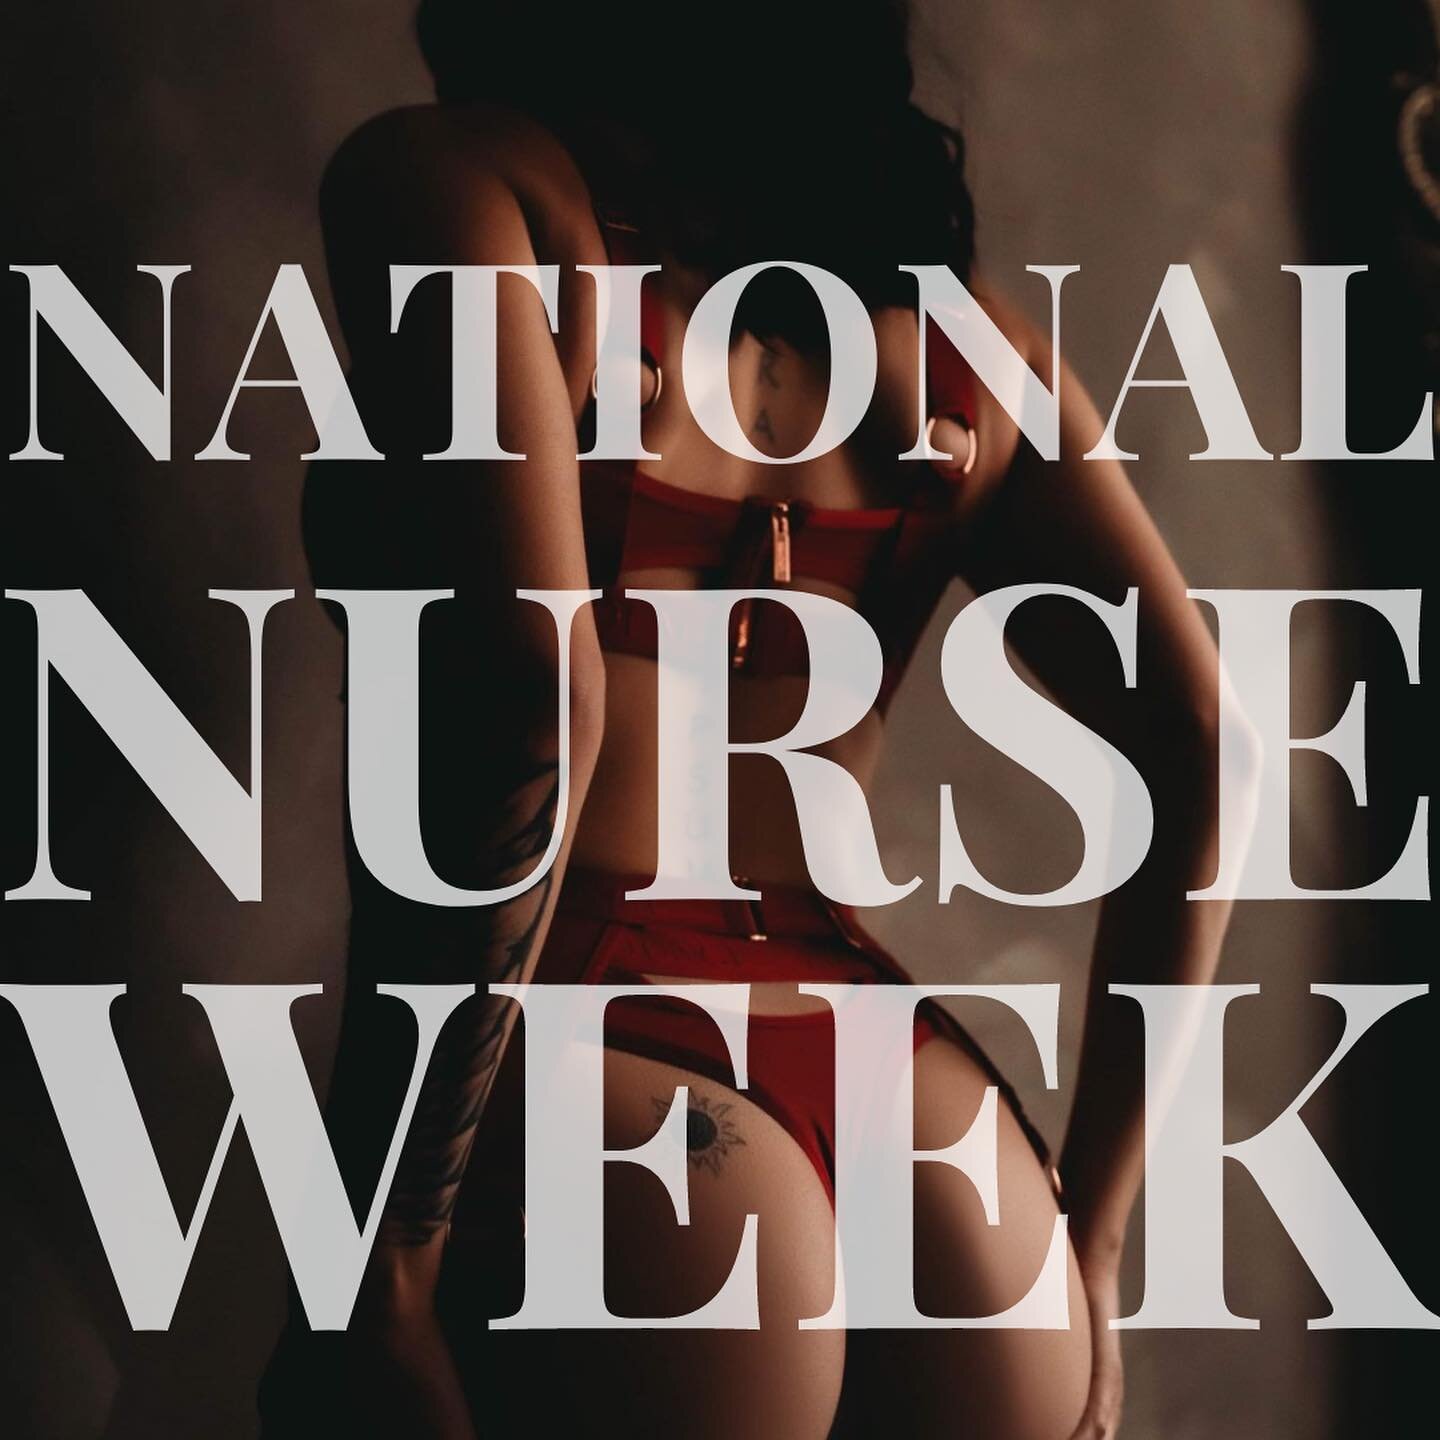 Nurses&hellip;

here is my personal invitation to you 😉

In celebration of all your sacrifice, hard work and commitment to helping others we&rsquo;re providing the opportunity over the next 24 hours to the first 5 nurses who put their names down to 